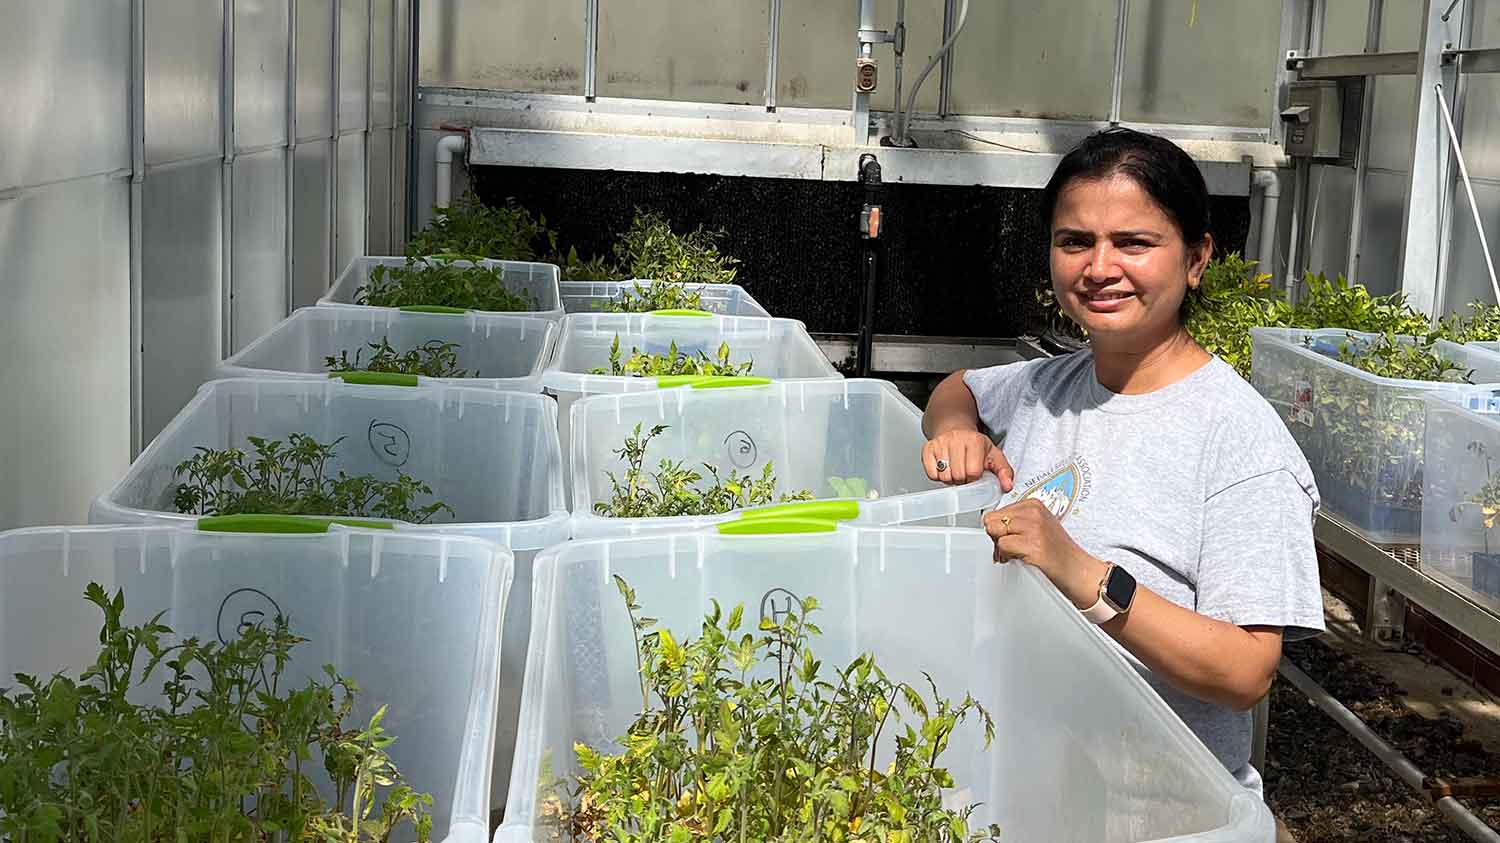 Anju Pandey evaluating tomatoes for leaf spot disease in greenhouse